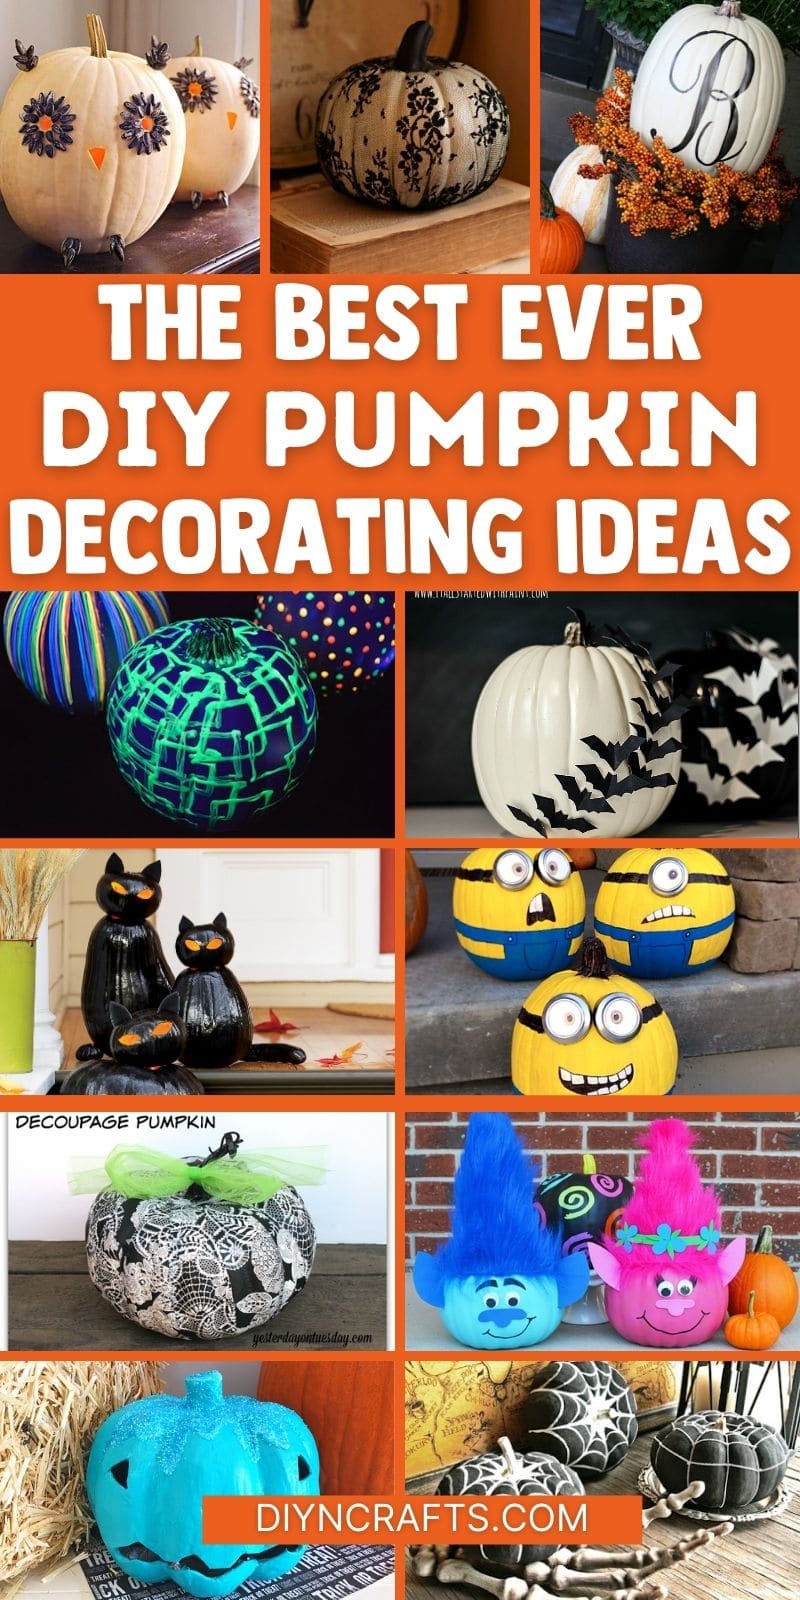 70+ Creative Pumpkin Carving and Decorating Ideas You Can Easily DIY